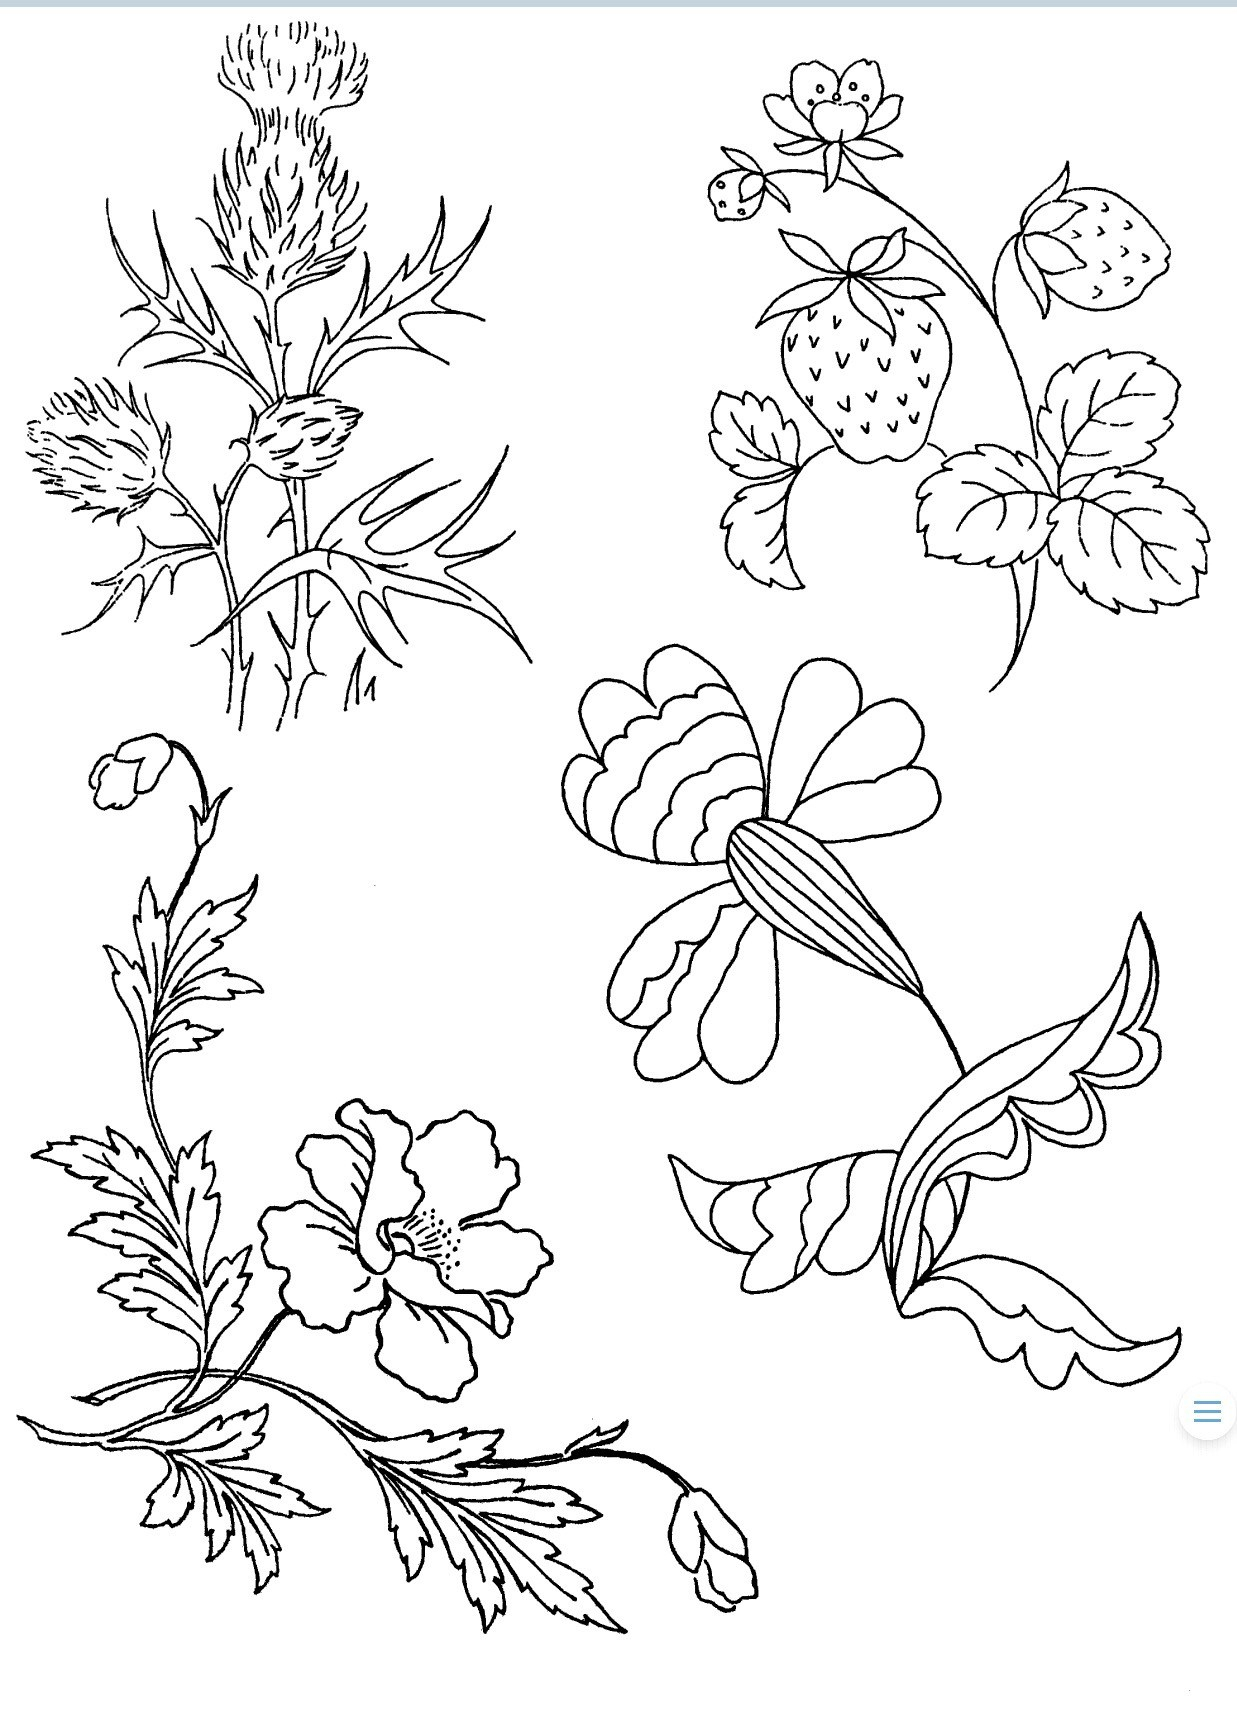 Hand Embroidery Patterns Free Embroidery Patterns Free Pdf Lots Of Patterns